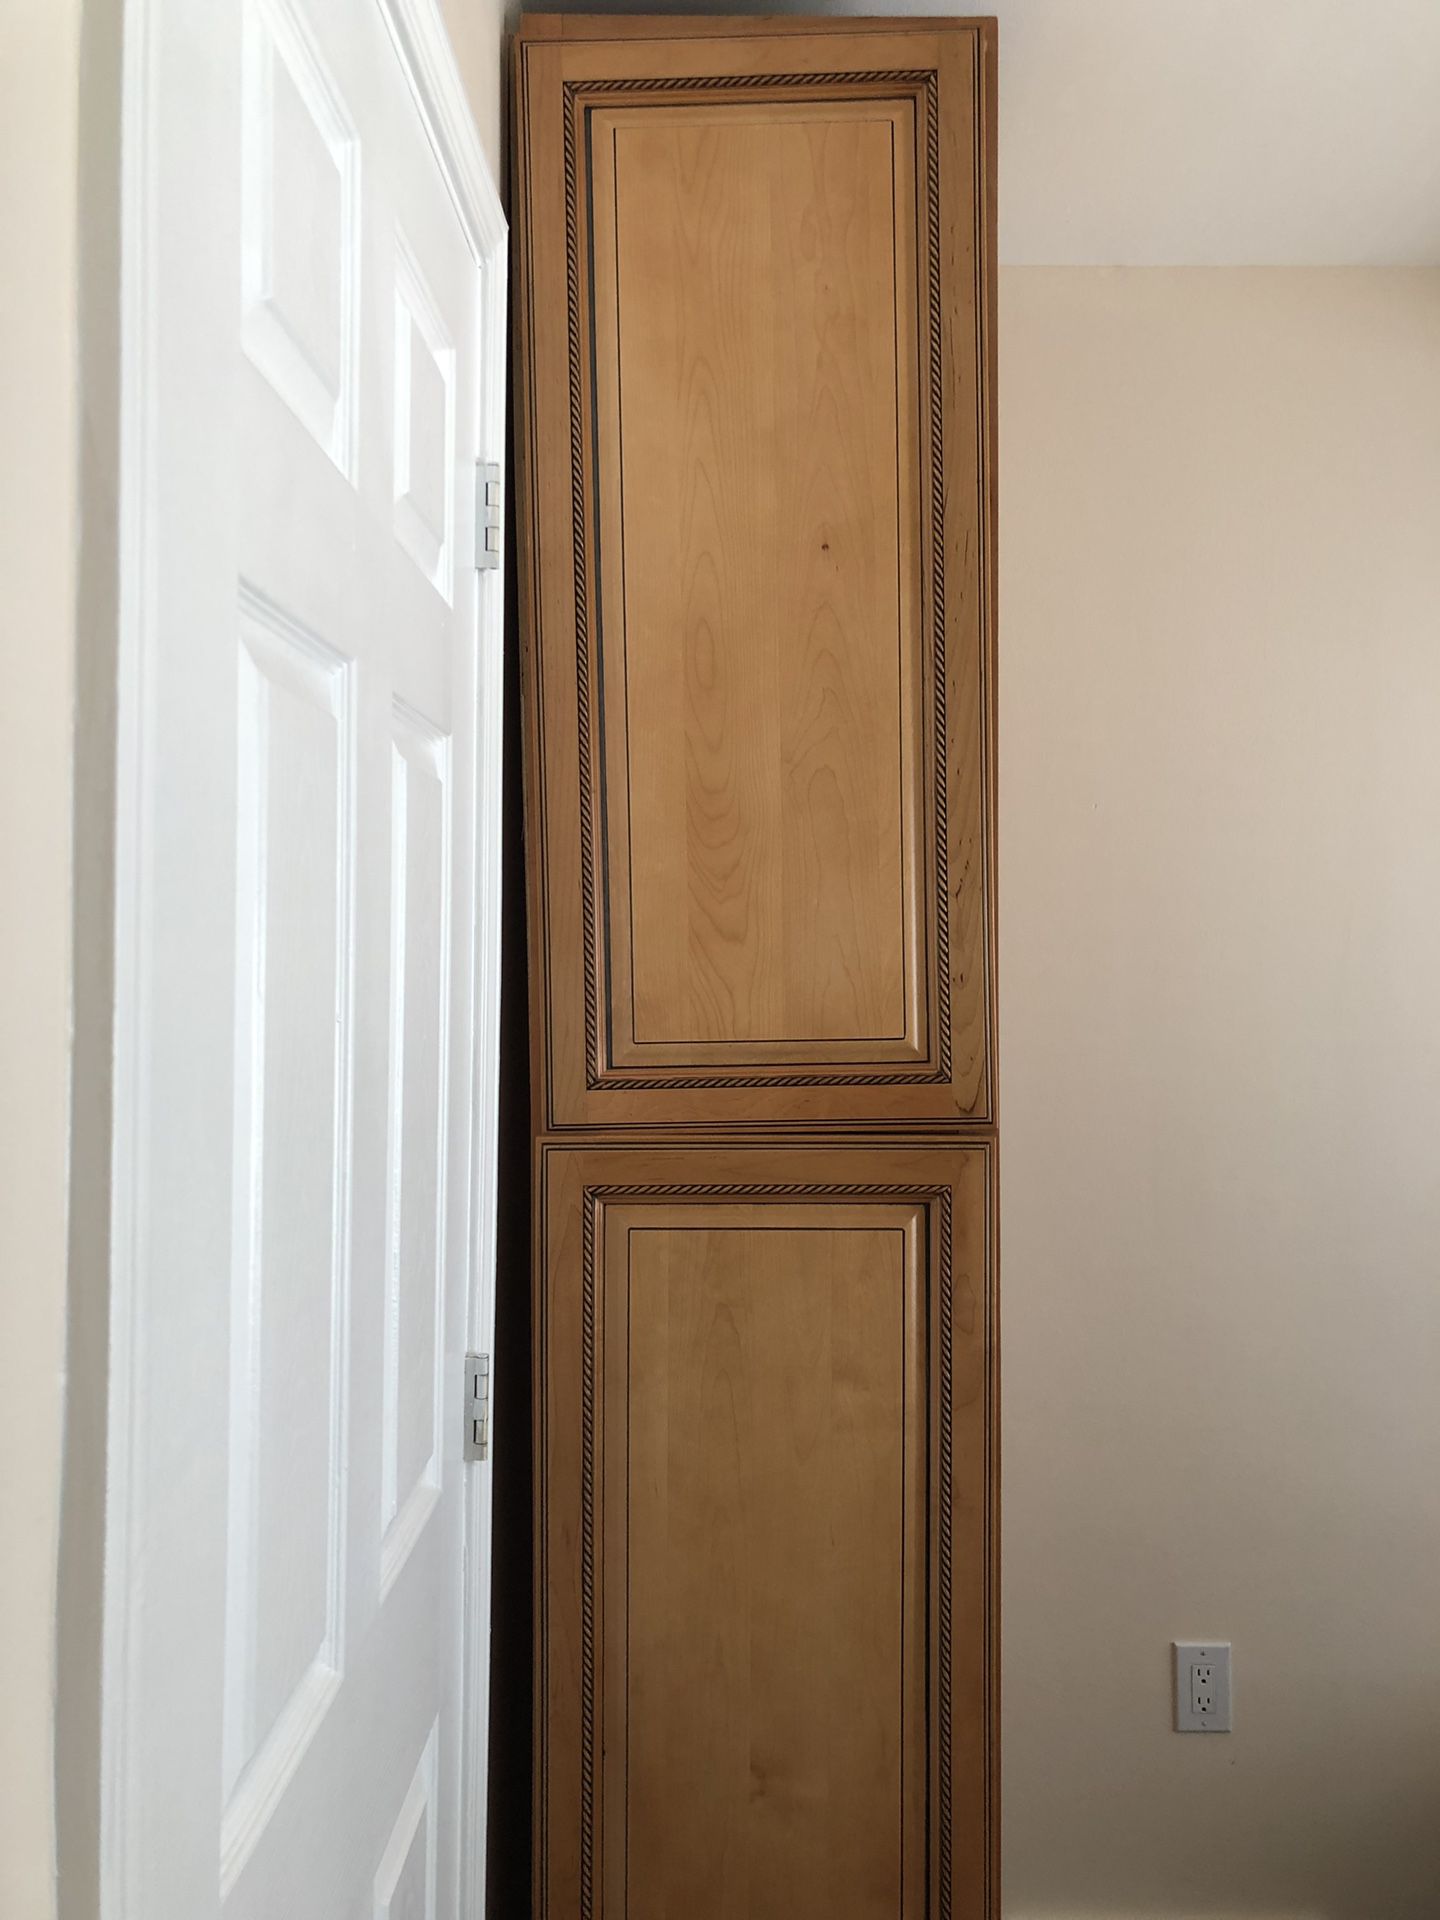 Wooden cabinet, tall, intricate detail. Never used, shelves included. Width front to back 24inchs. Width across front 17.5inches. Height 92.5inches